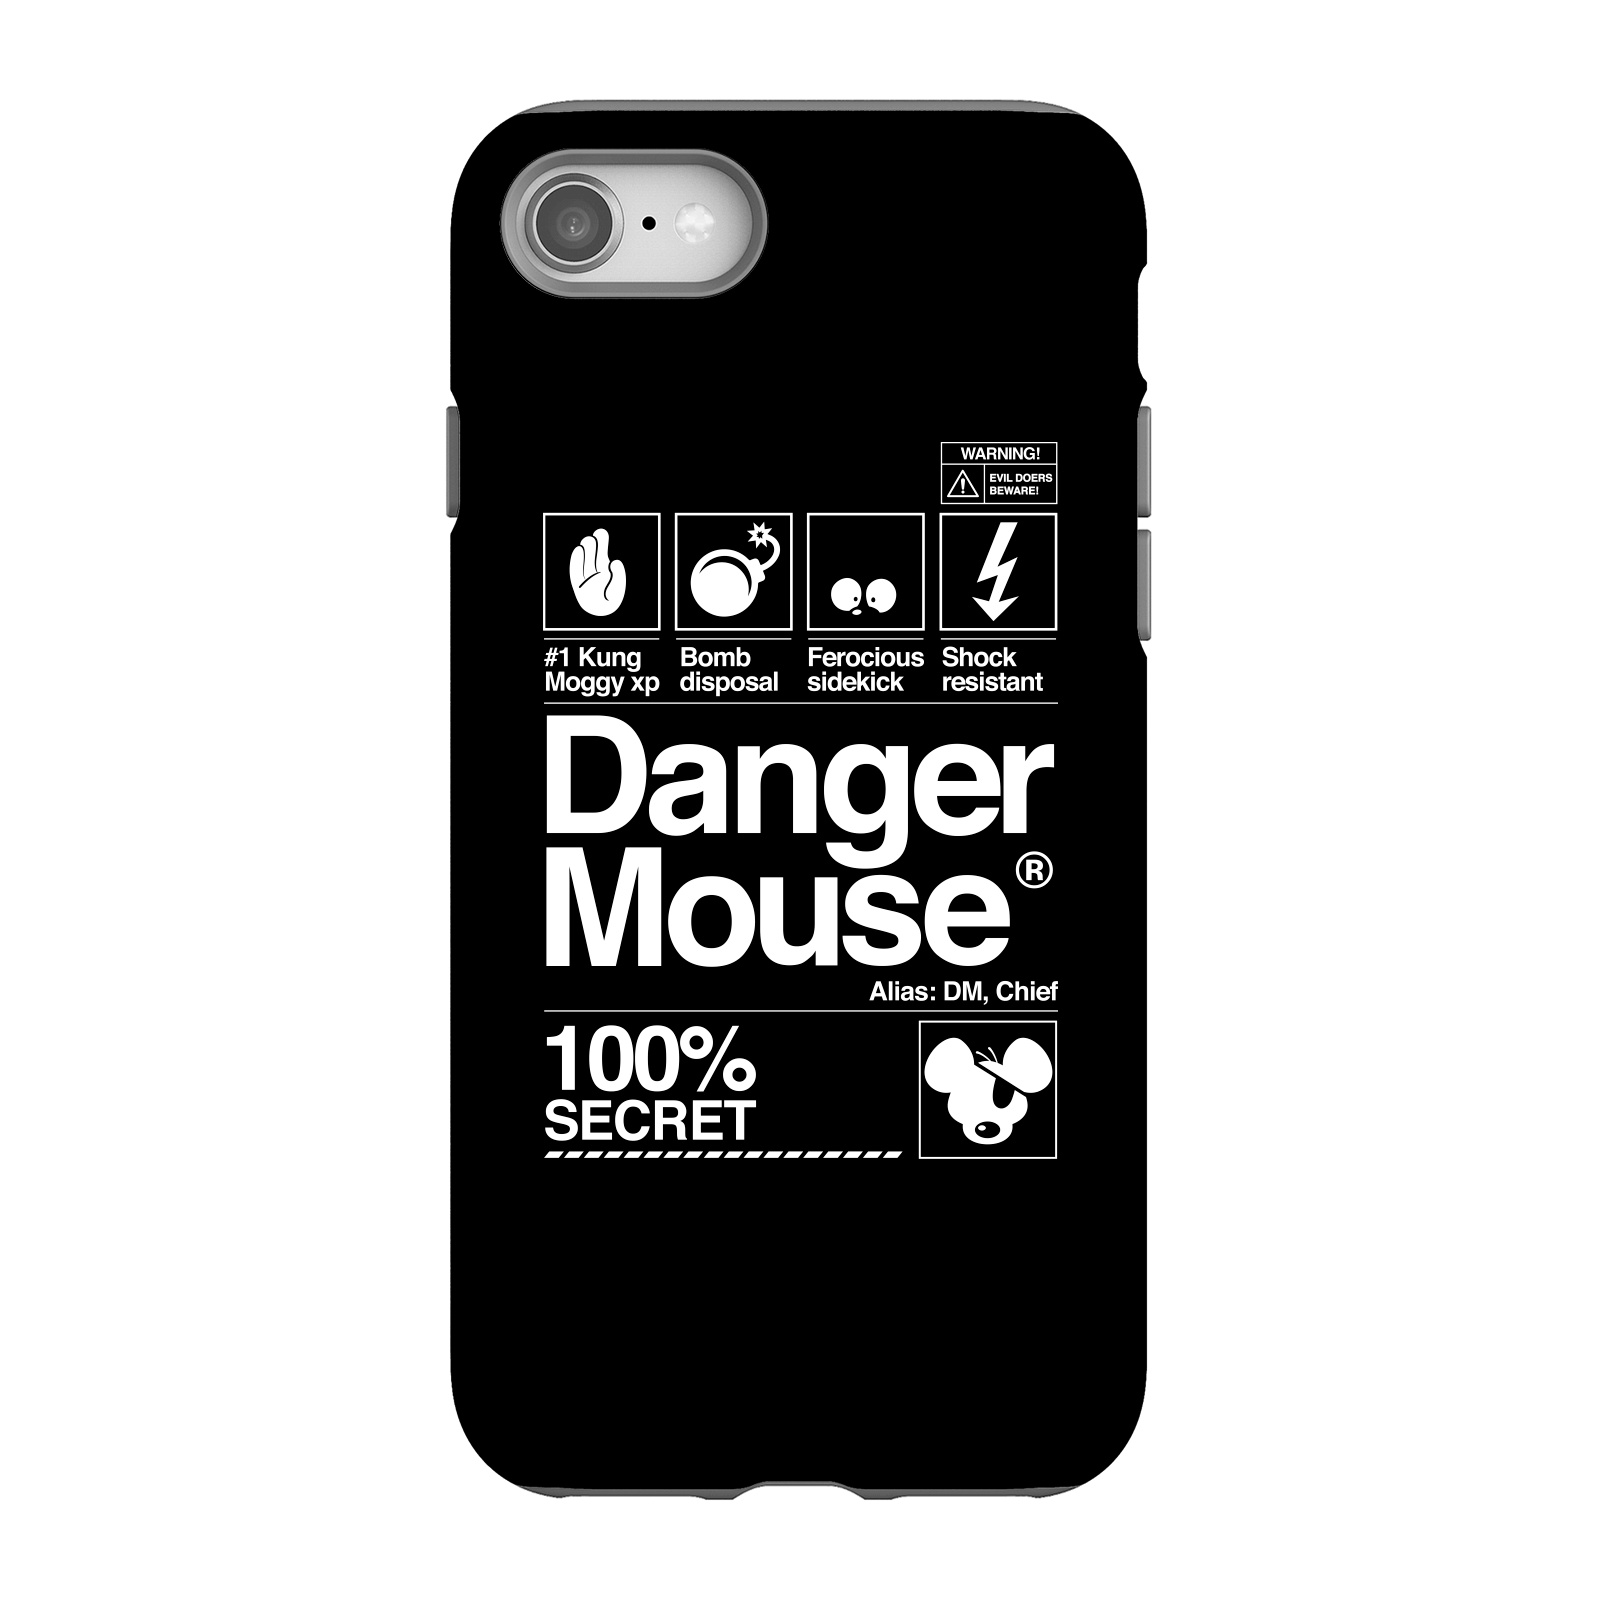 Danger Mouse 100% Secret Phone Case for iPhone and Android - iPhone 8 - Tough Case - Matte